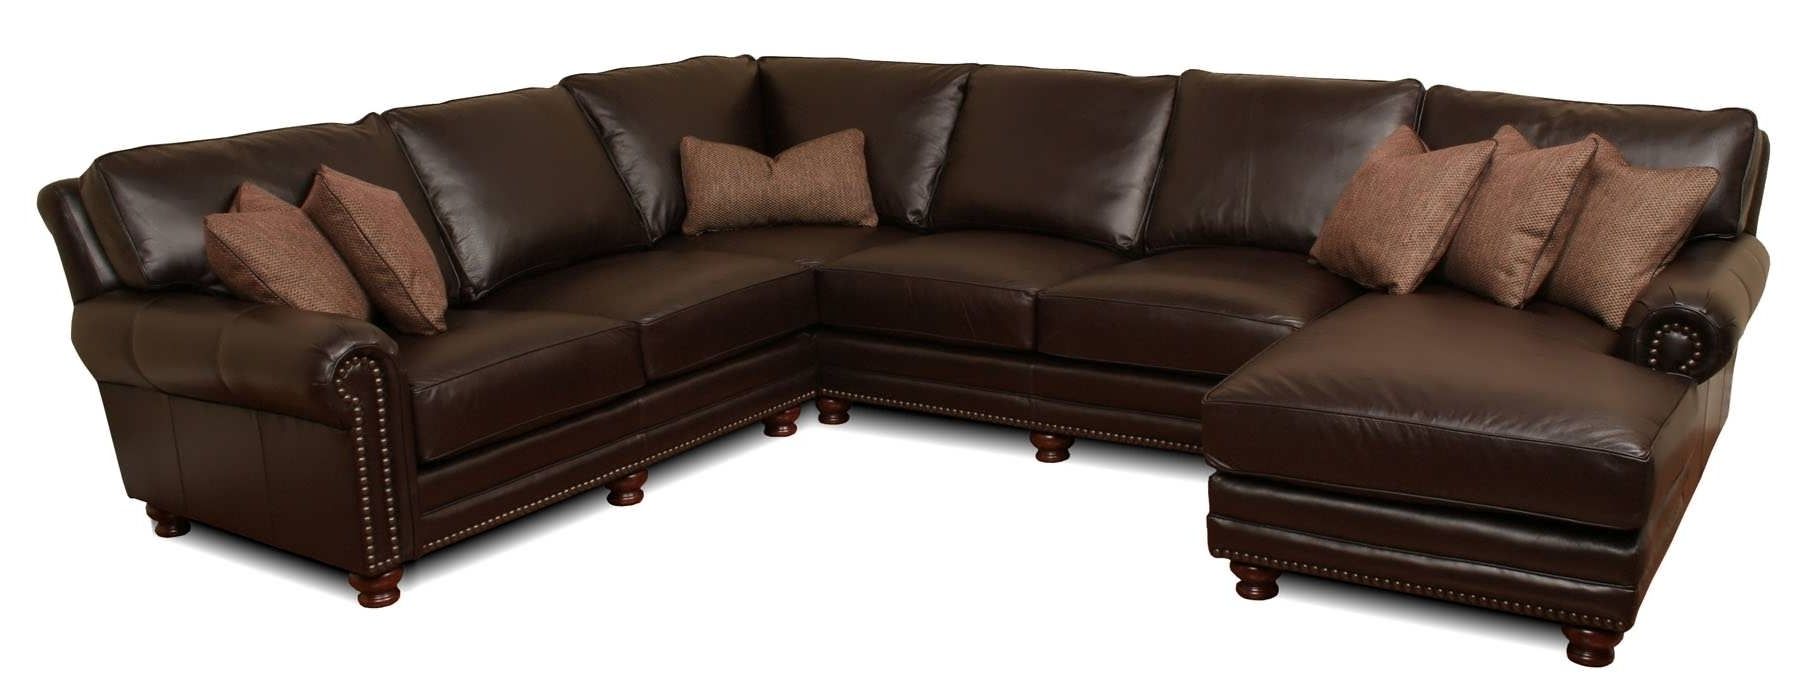 Sofa : Sofa Furniture Microfiber Sectional Couch Grey Leather Within Popular Leather Sectional Chaises (View 3 of 15)